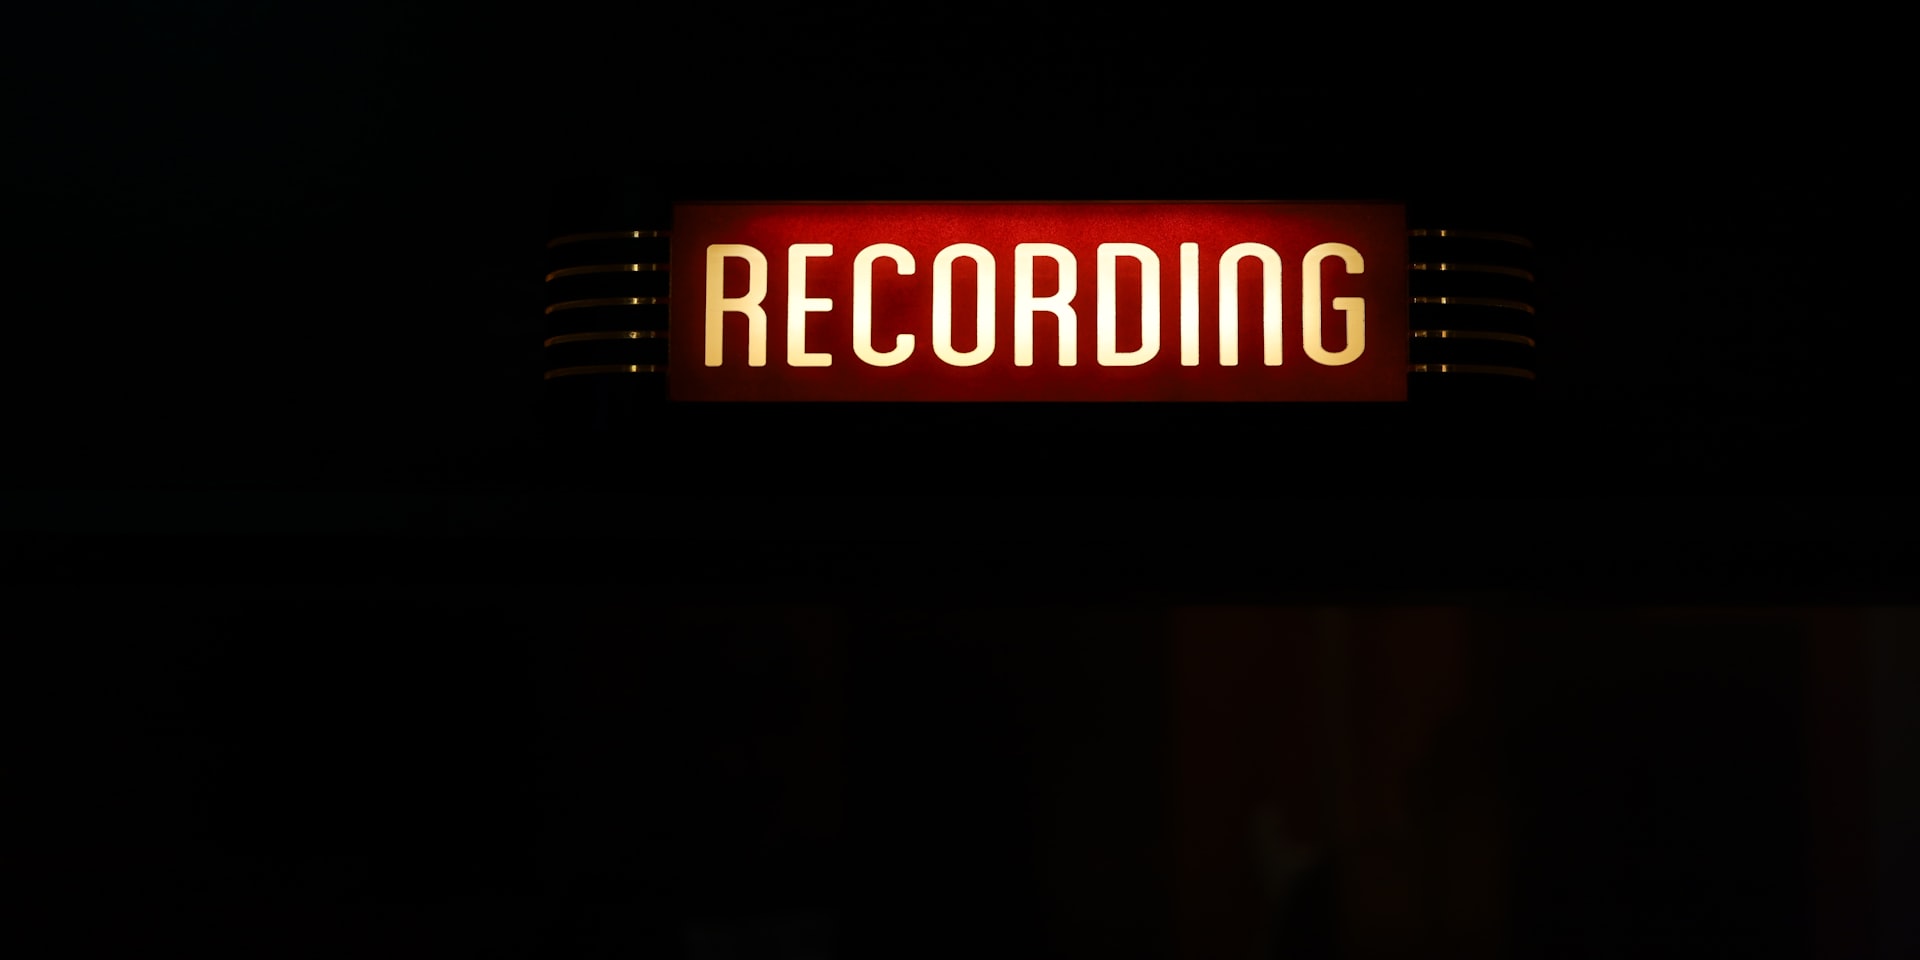 Cover Image for STRONG RECORDING 